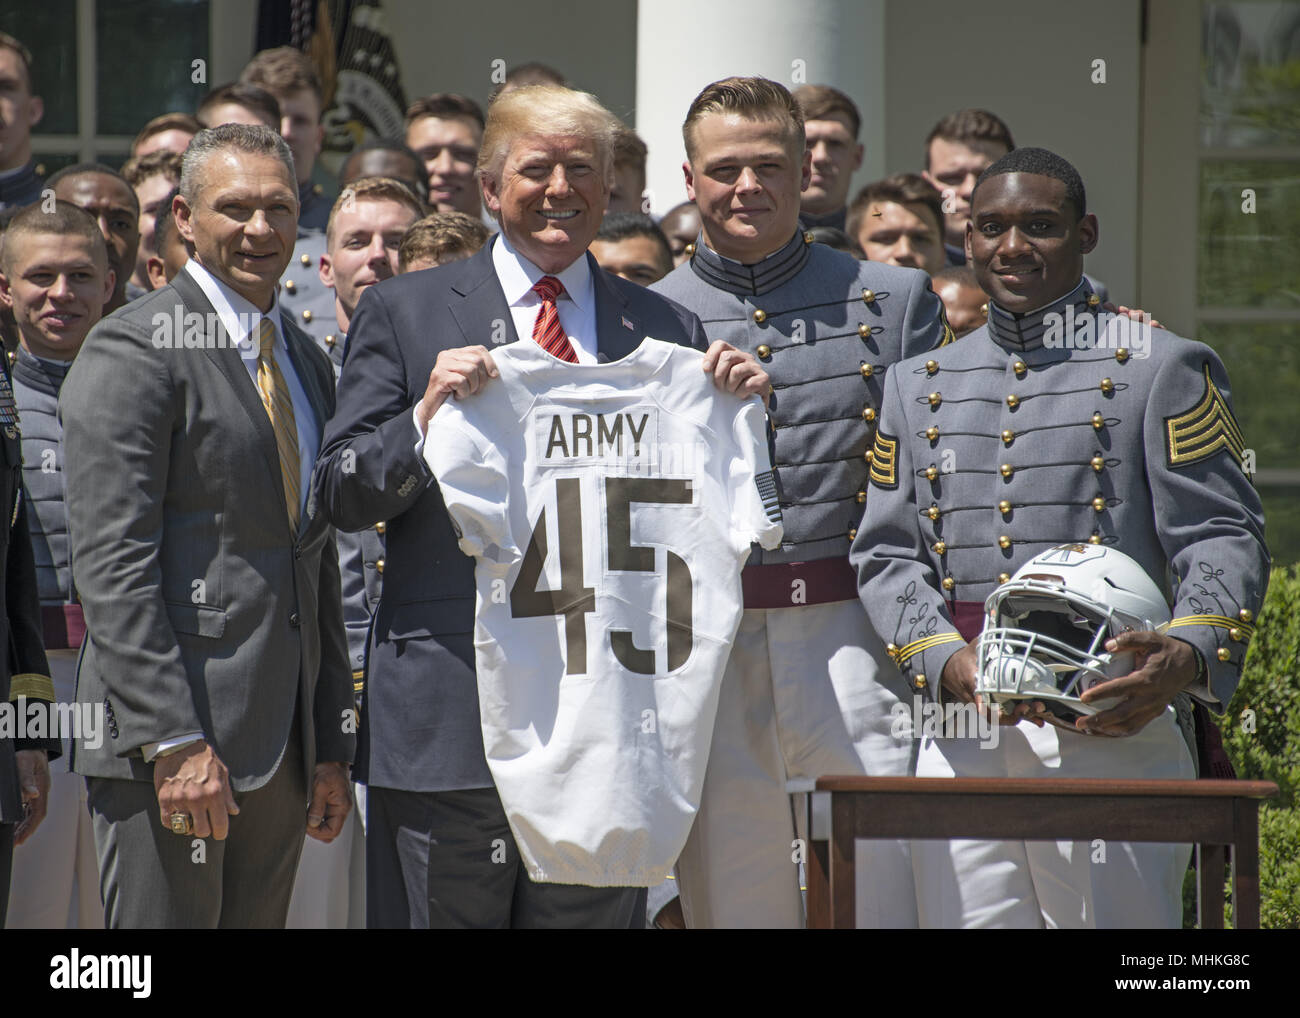 United States President Donald J. Trump presents the Commander-in-Chief's Trophy to the U.S. Military Academy football team in the Rose Garden of the White House in Washington, DC on Tuesday, May 1, 2018. The Commander-in-Chief's trophy is presented to the winner of the annual Army-Navy football game which was played at Lincoln Financial Field in Philadelphia, Pennsylvania on December 9, 2017. Pictured from left to right: Head coach Jeff Monken, President Trump, defensive lineman and co-Captain John Voit (59), and quarterback and co-Captain Ahmad Bradshaw (17). The Army Black Knights beat the Stock Photo